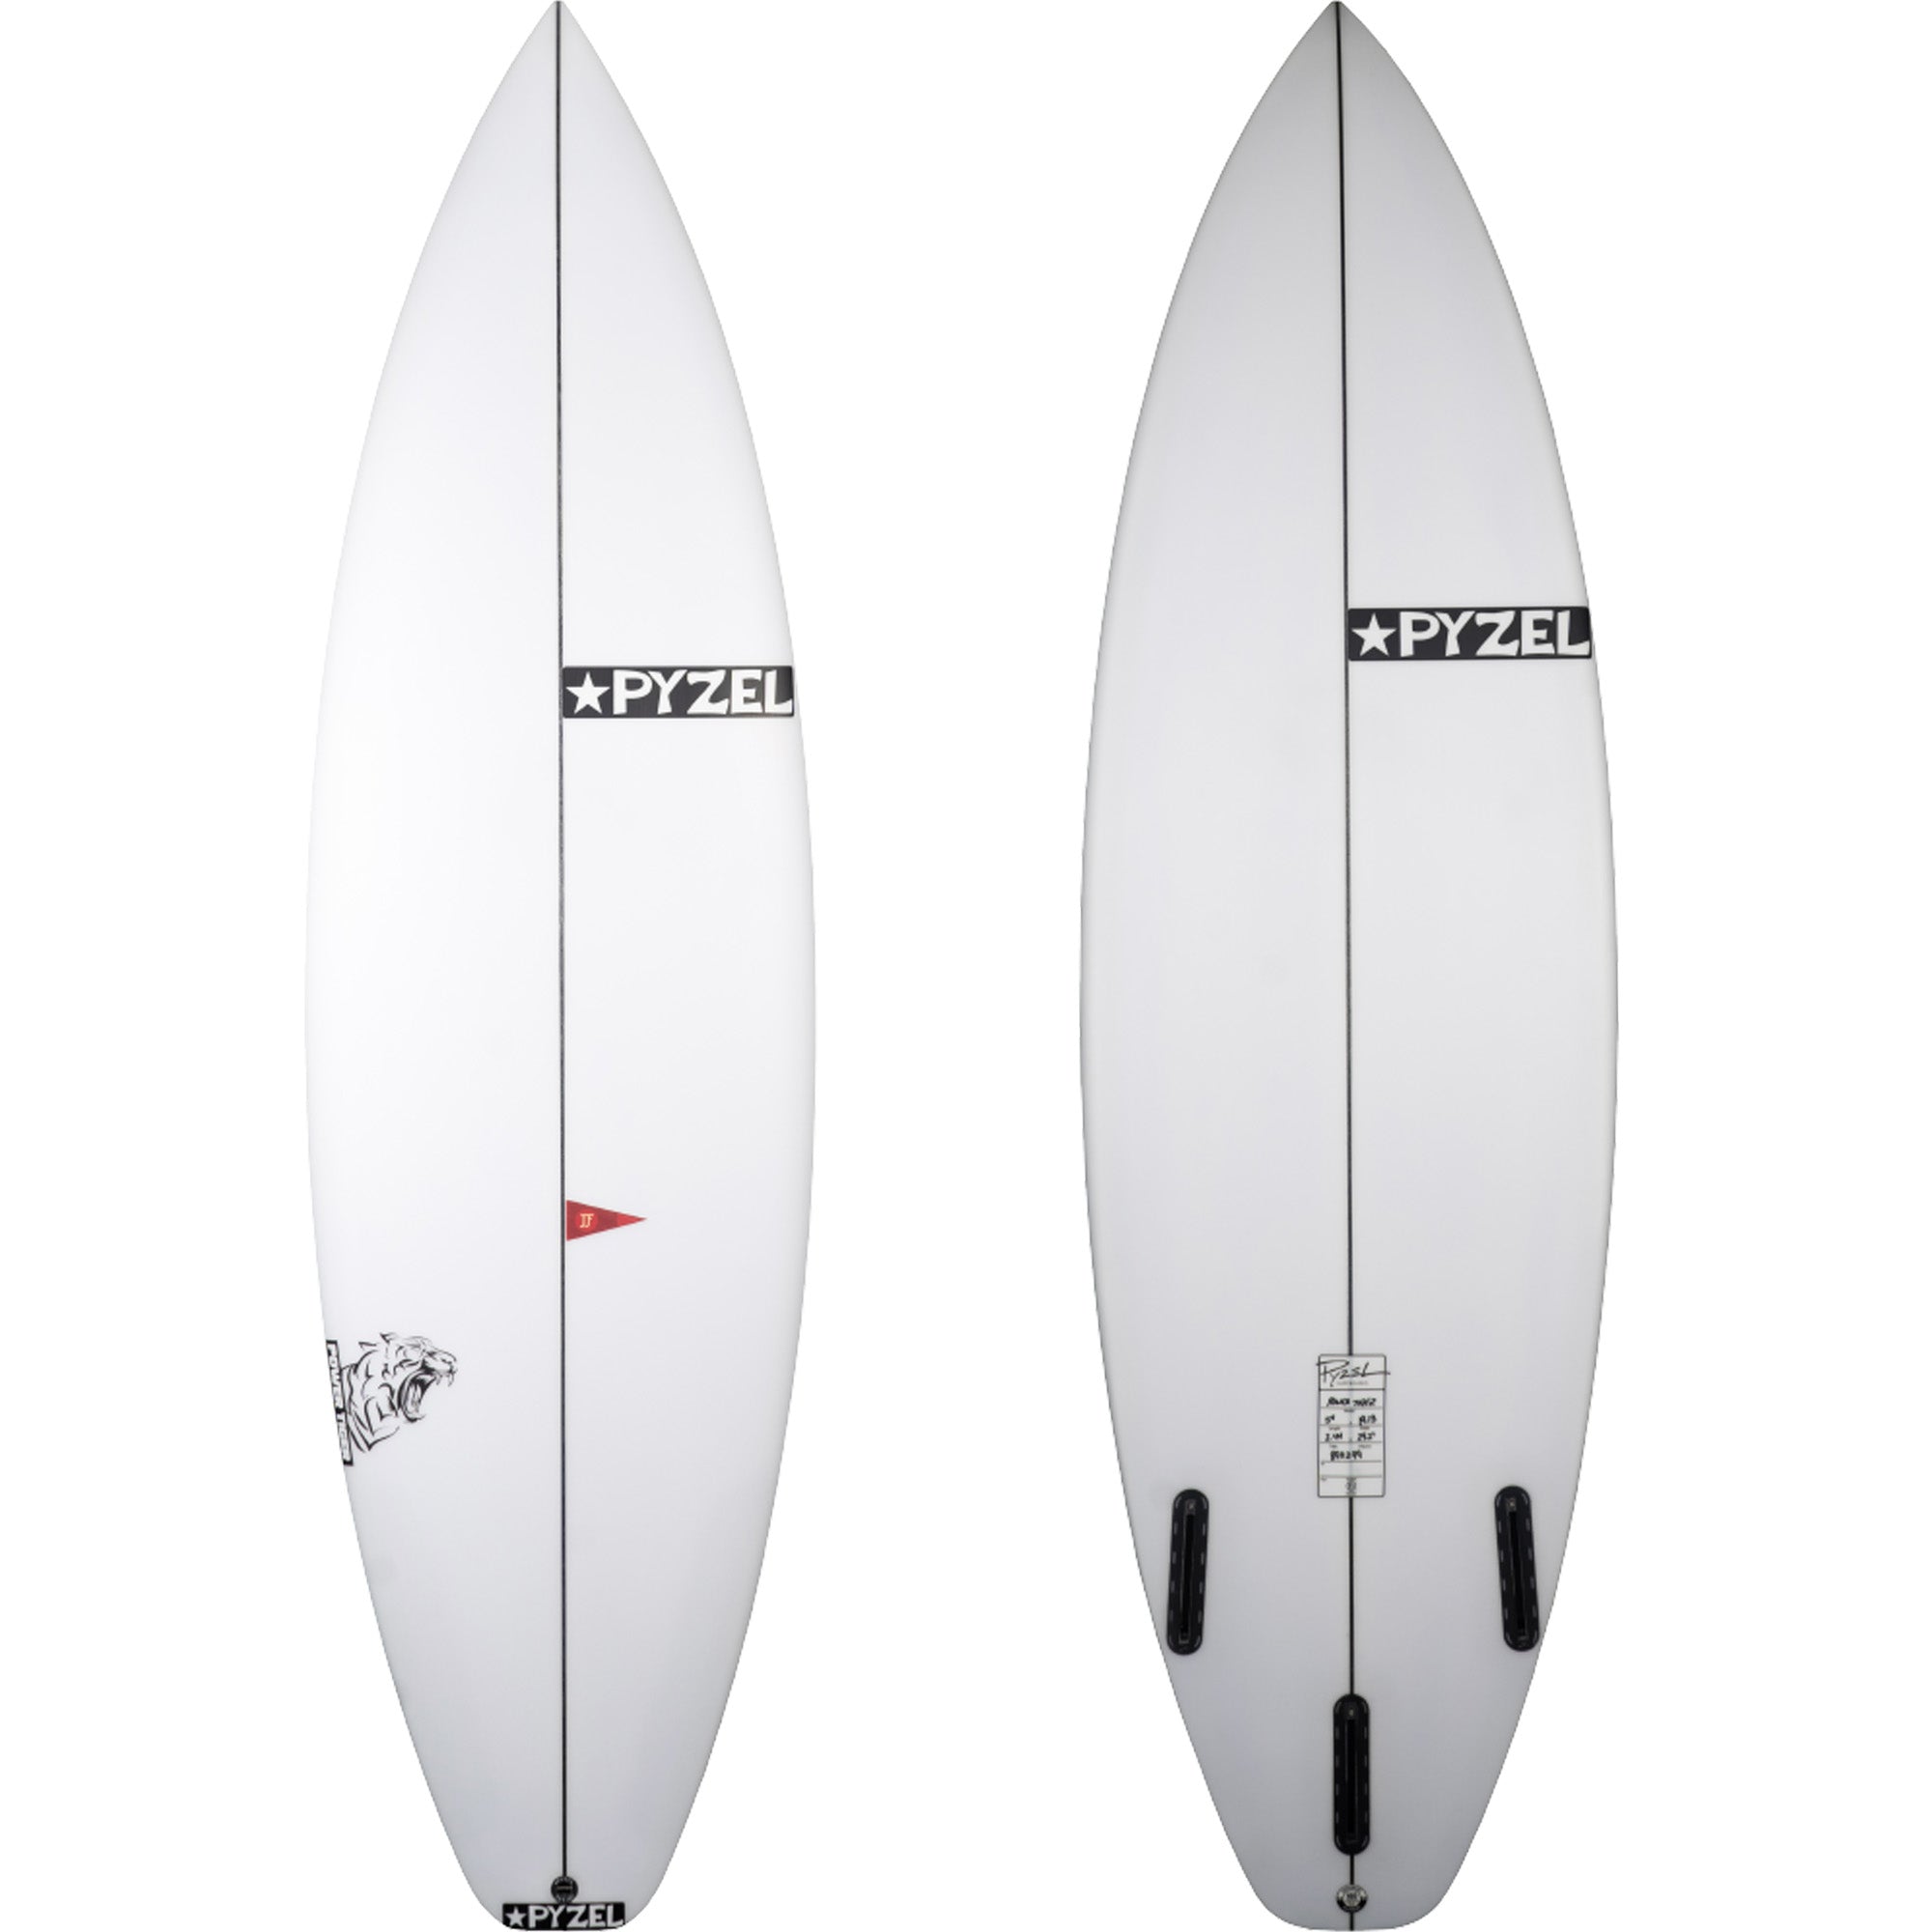 Pyzel Power Tiger 6'0" Surfboard - Futures